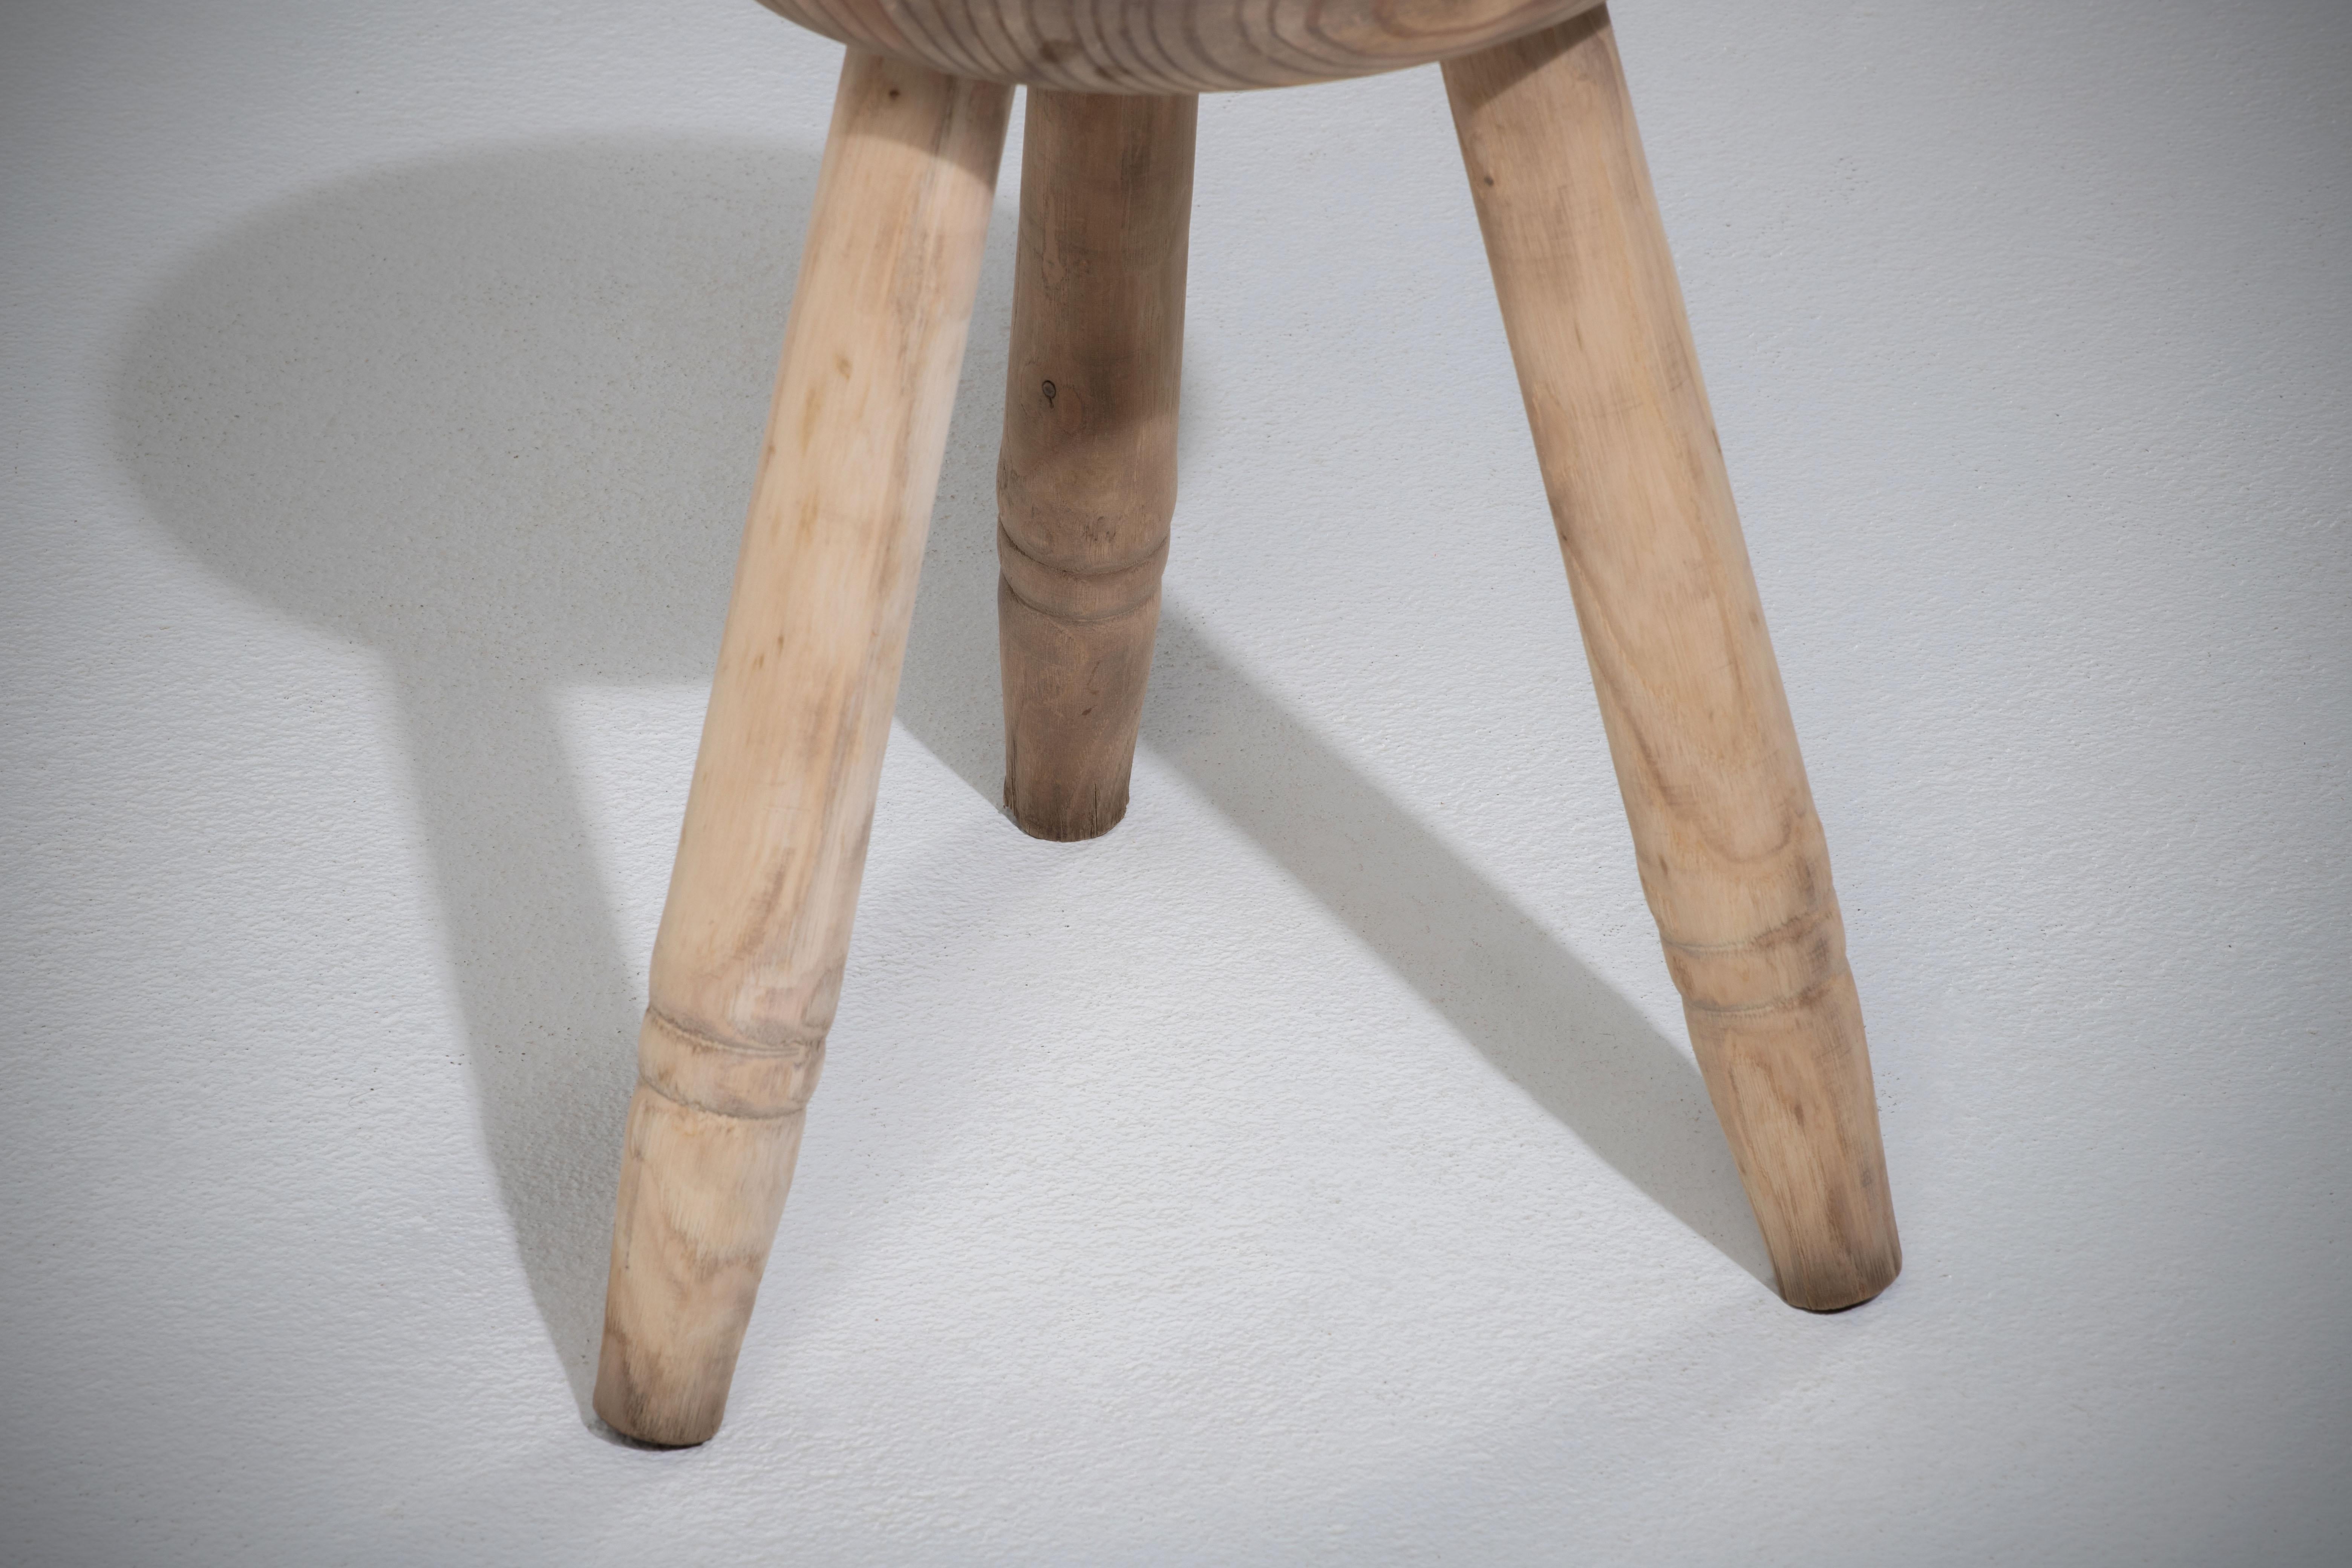 French Midcentury Pine Stool with Tapered Legs, 1960s, France For Sale